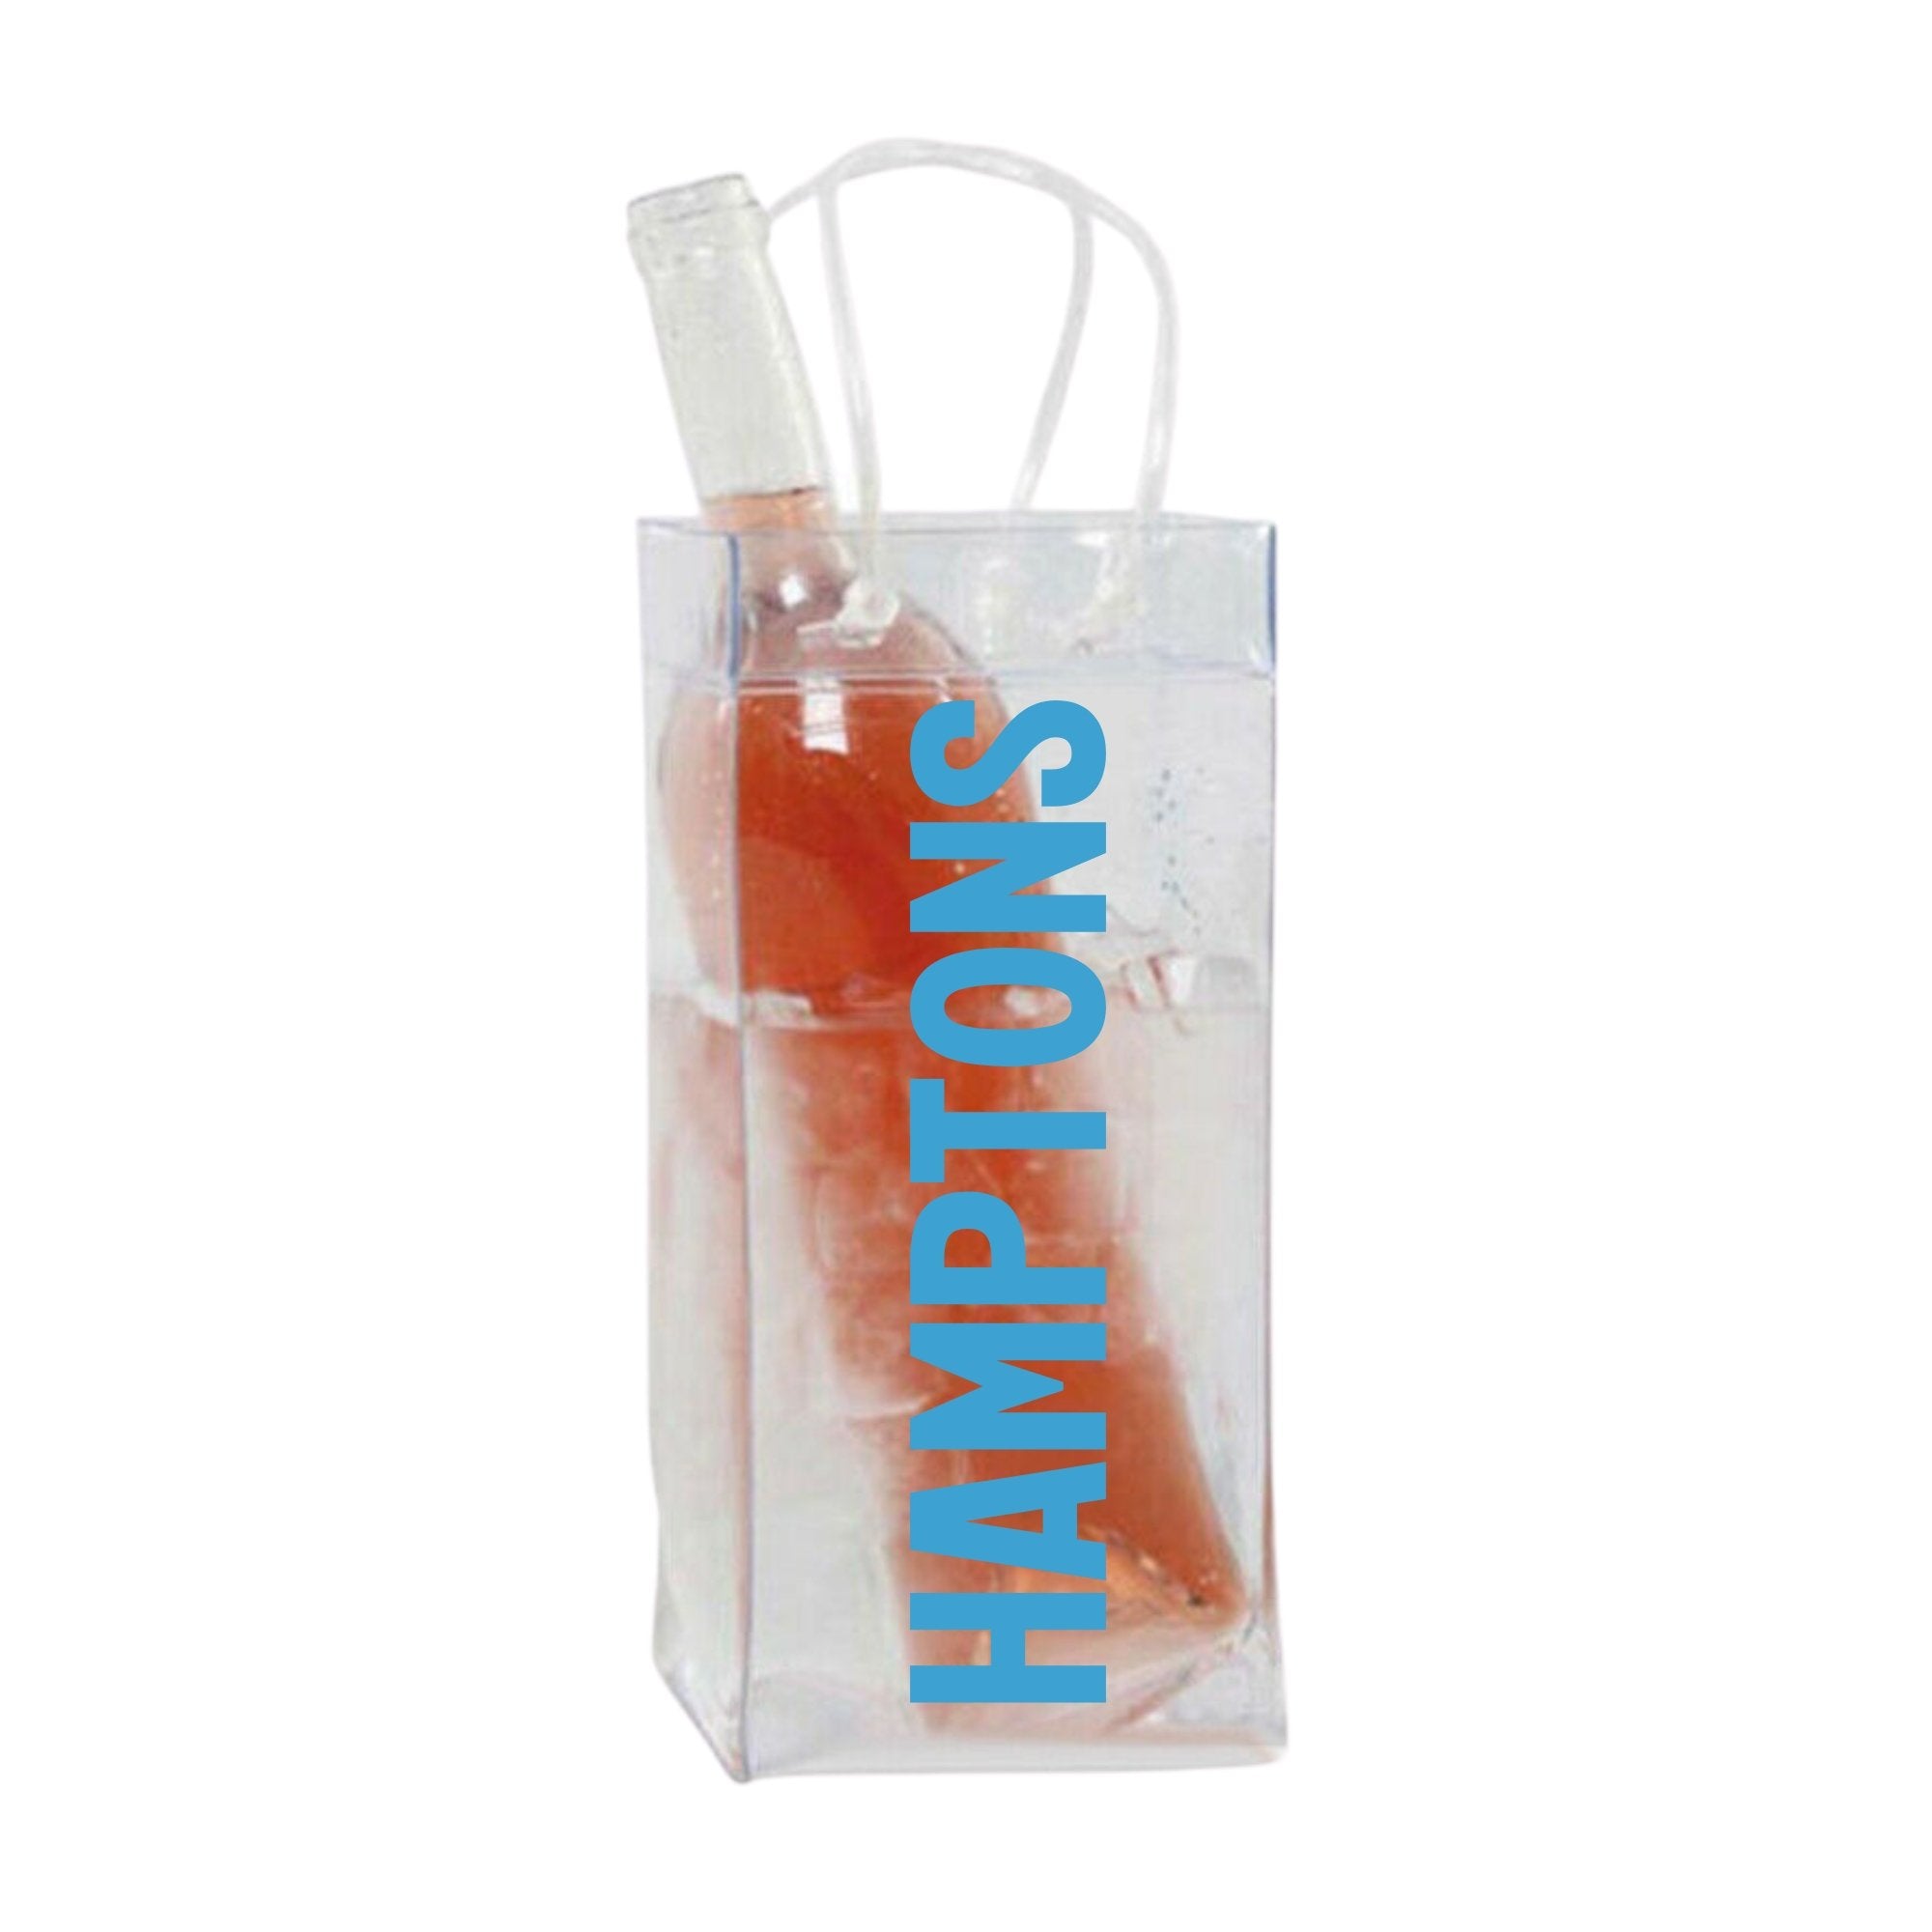 A clear wine bag that says "Hamptons" in blue